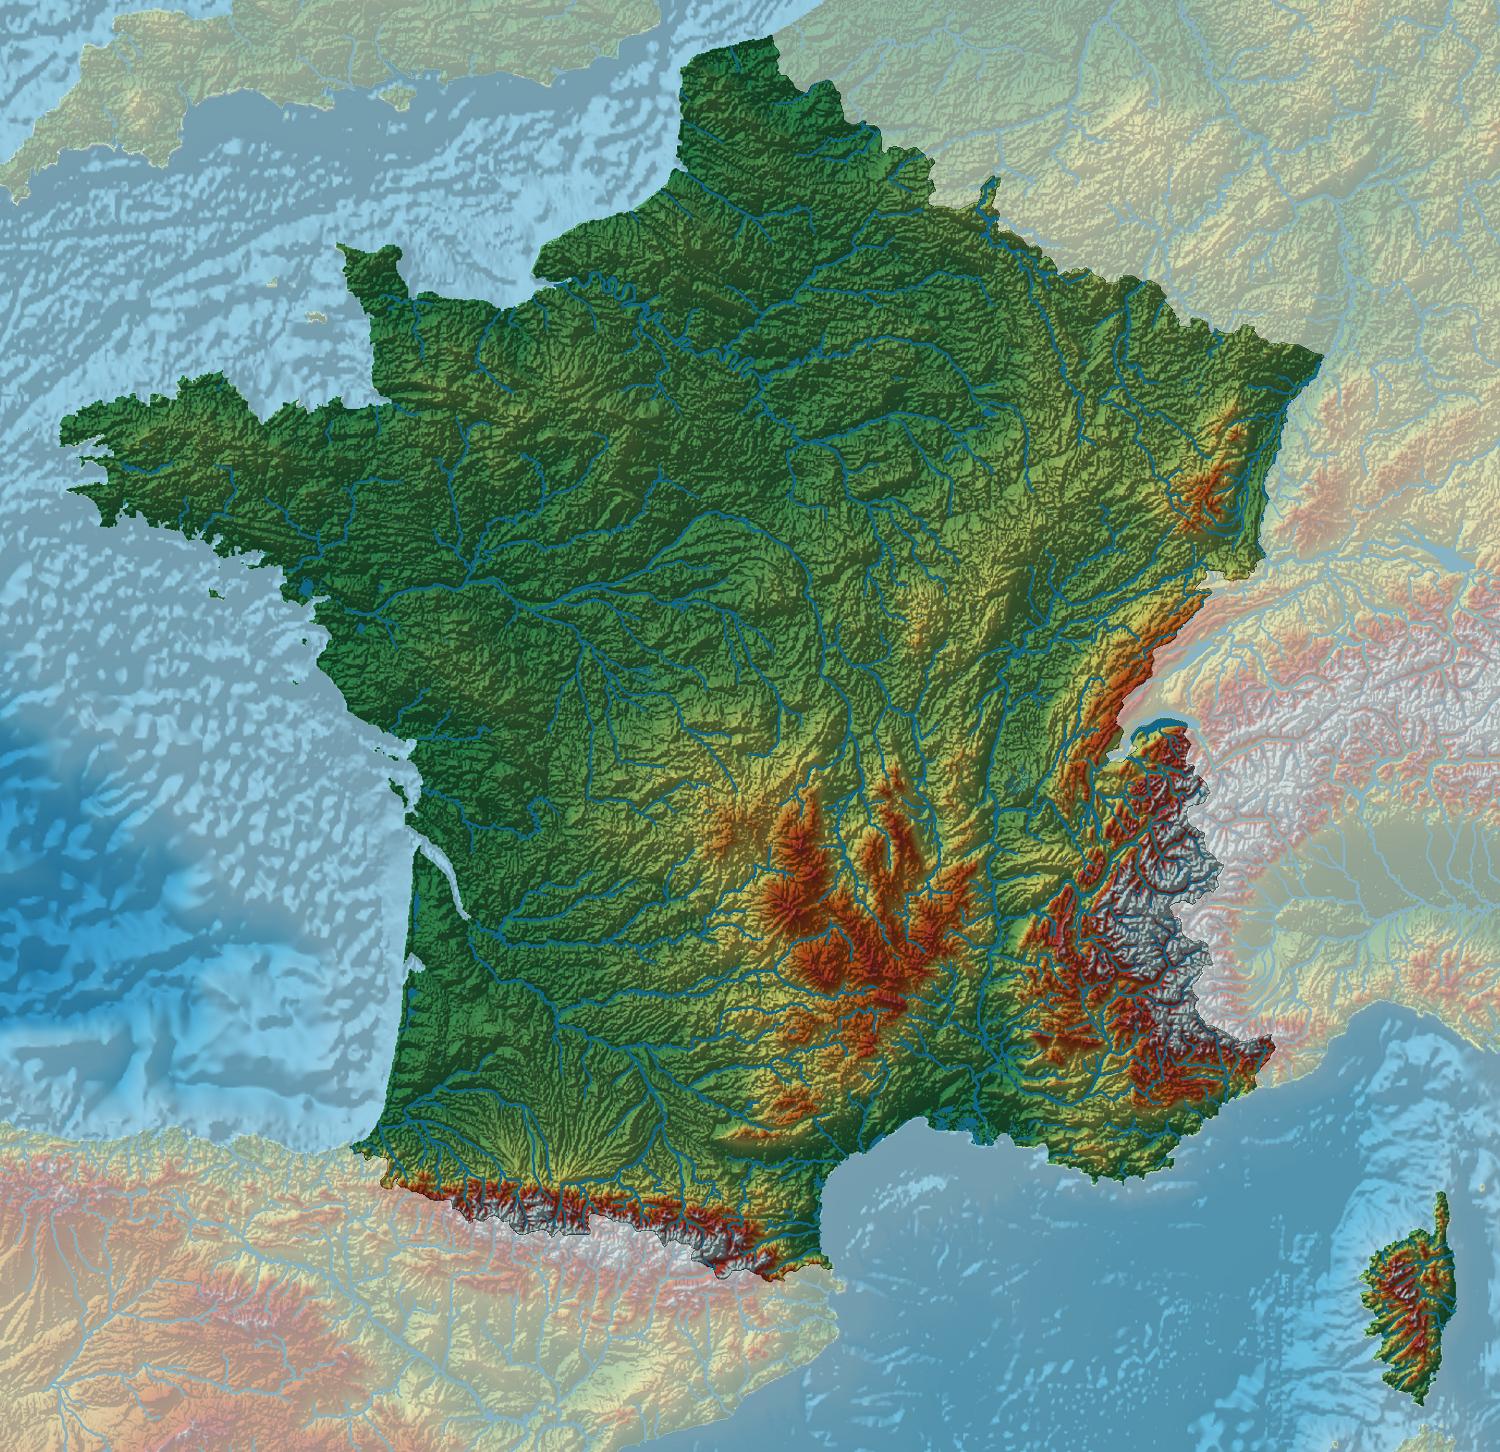 Geographical Map Of France Topography And Physical Features Of France